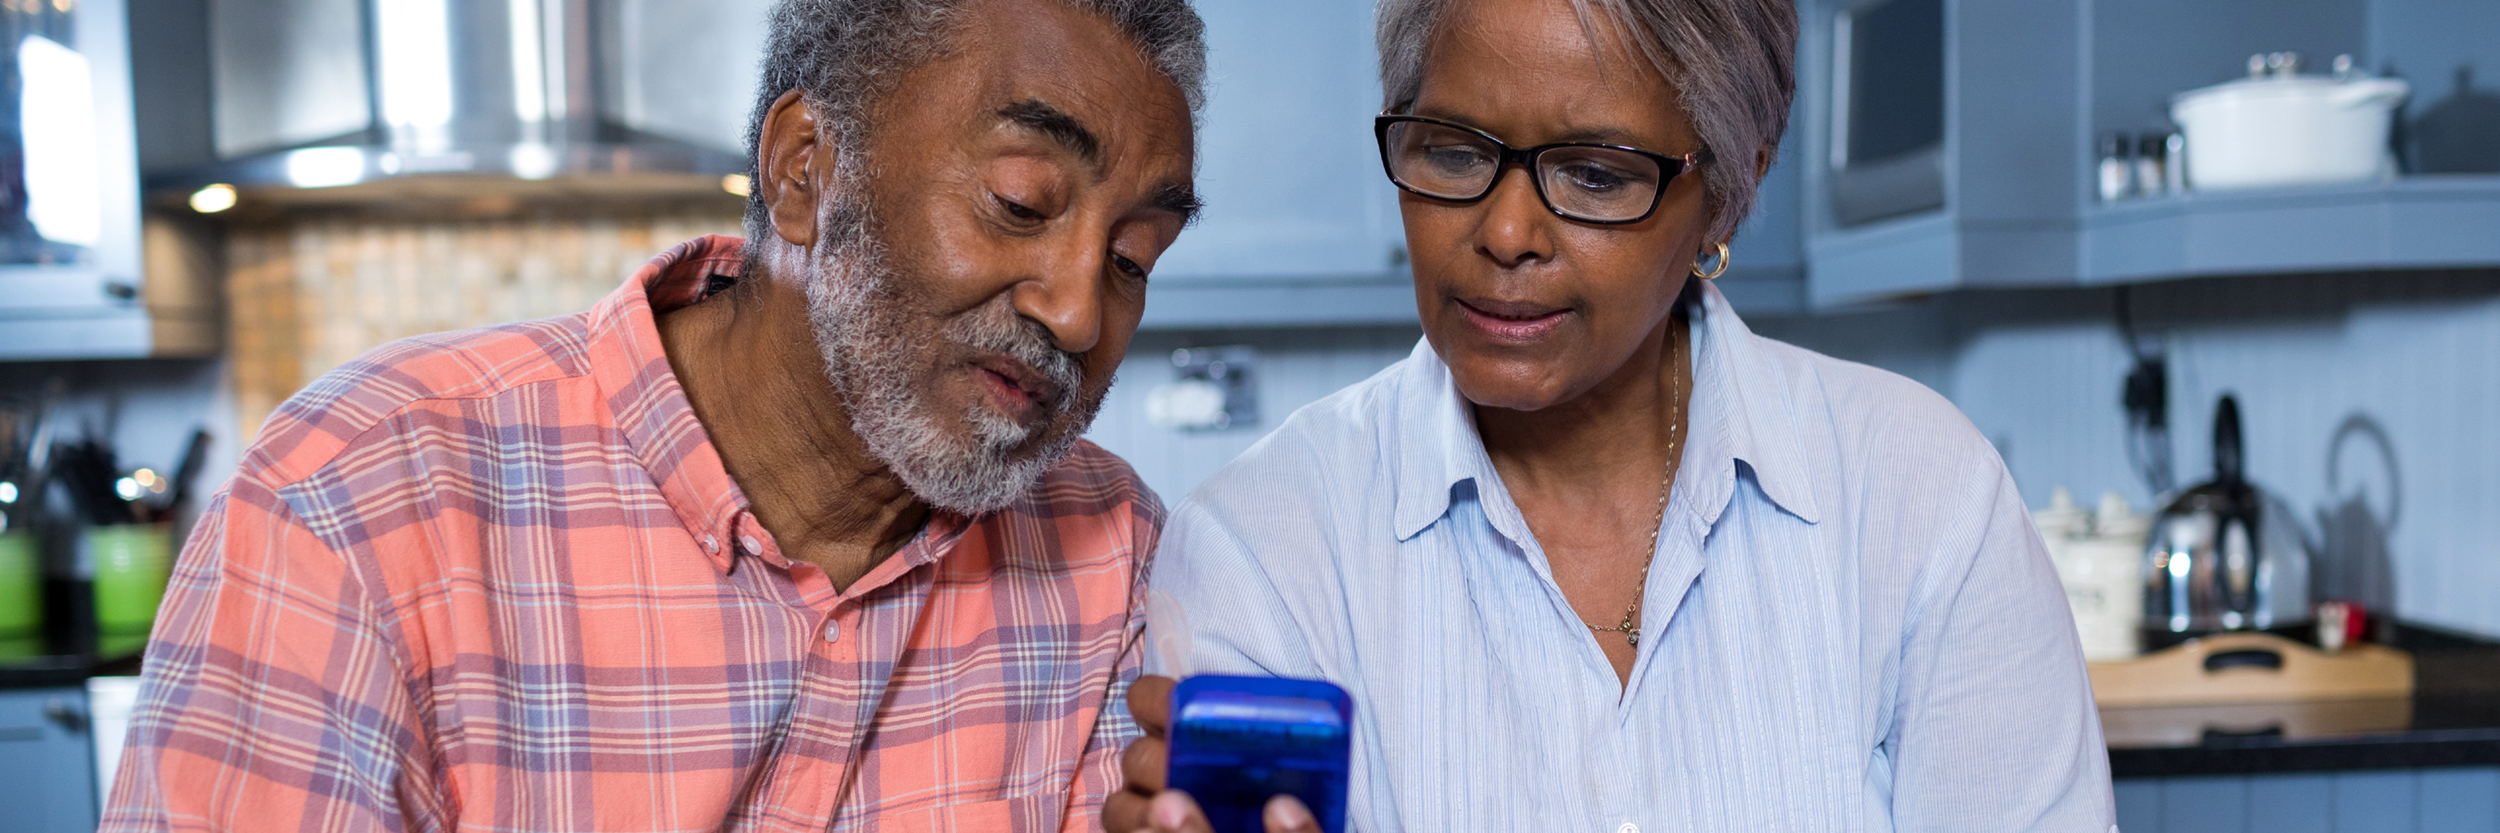 An older man and woman sit at a table, looking at a cell phone.